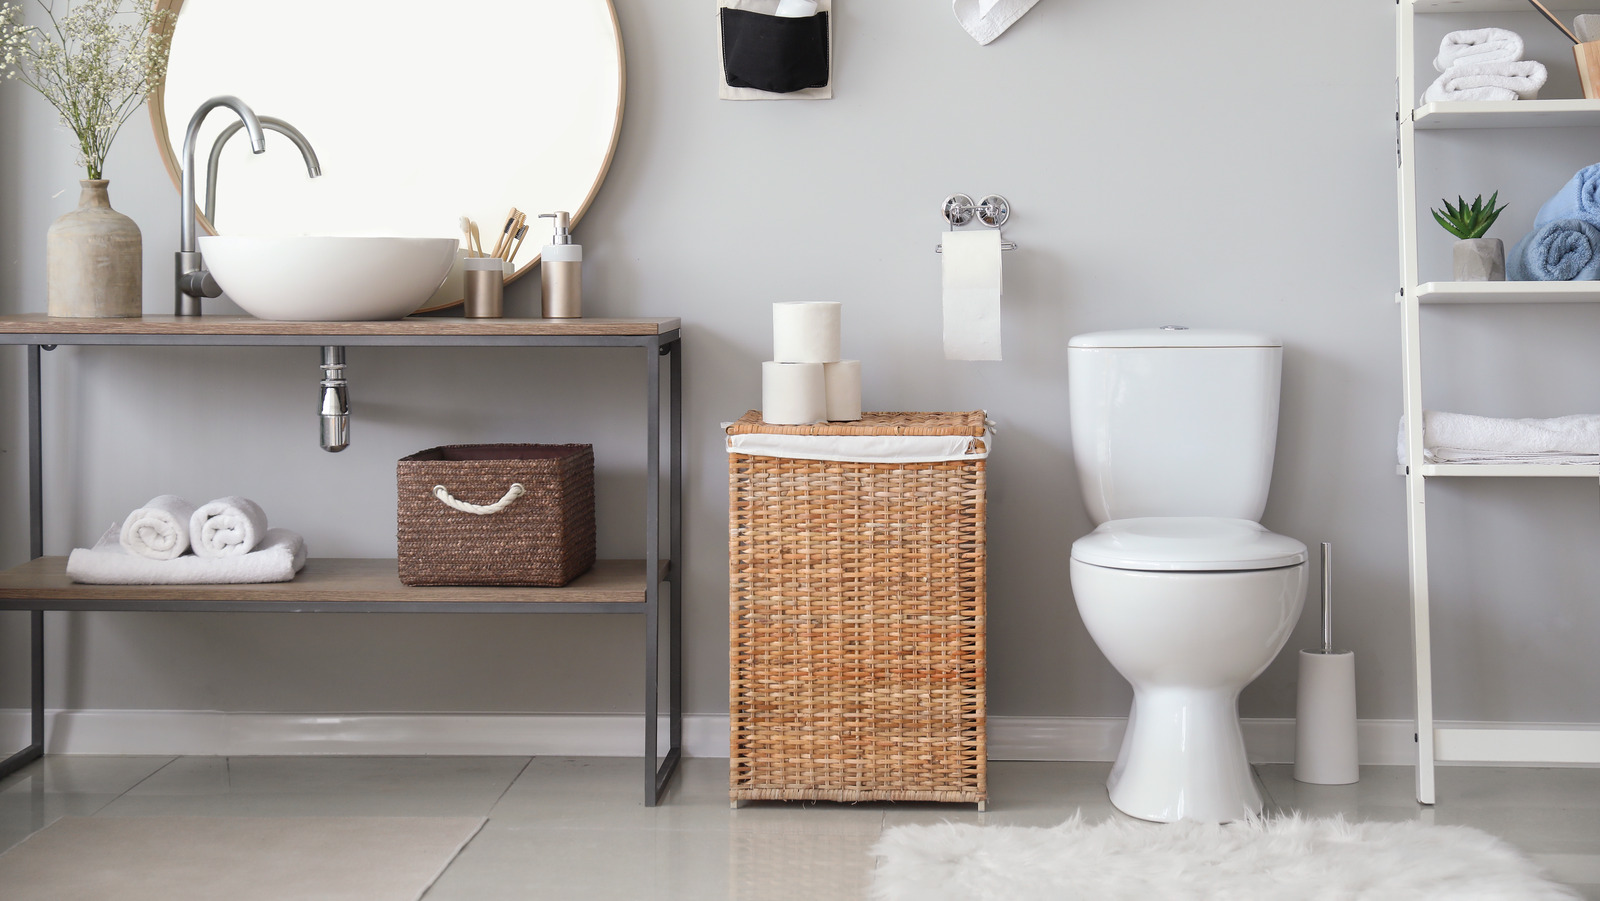 https://www.housedigest.com/img/gallery/items-to-declutter-in-your-bathroom-today/l-intro-1664912930.jpg